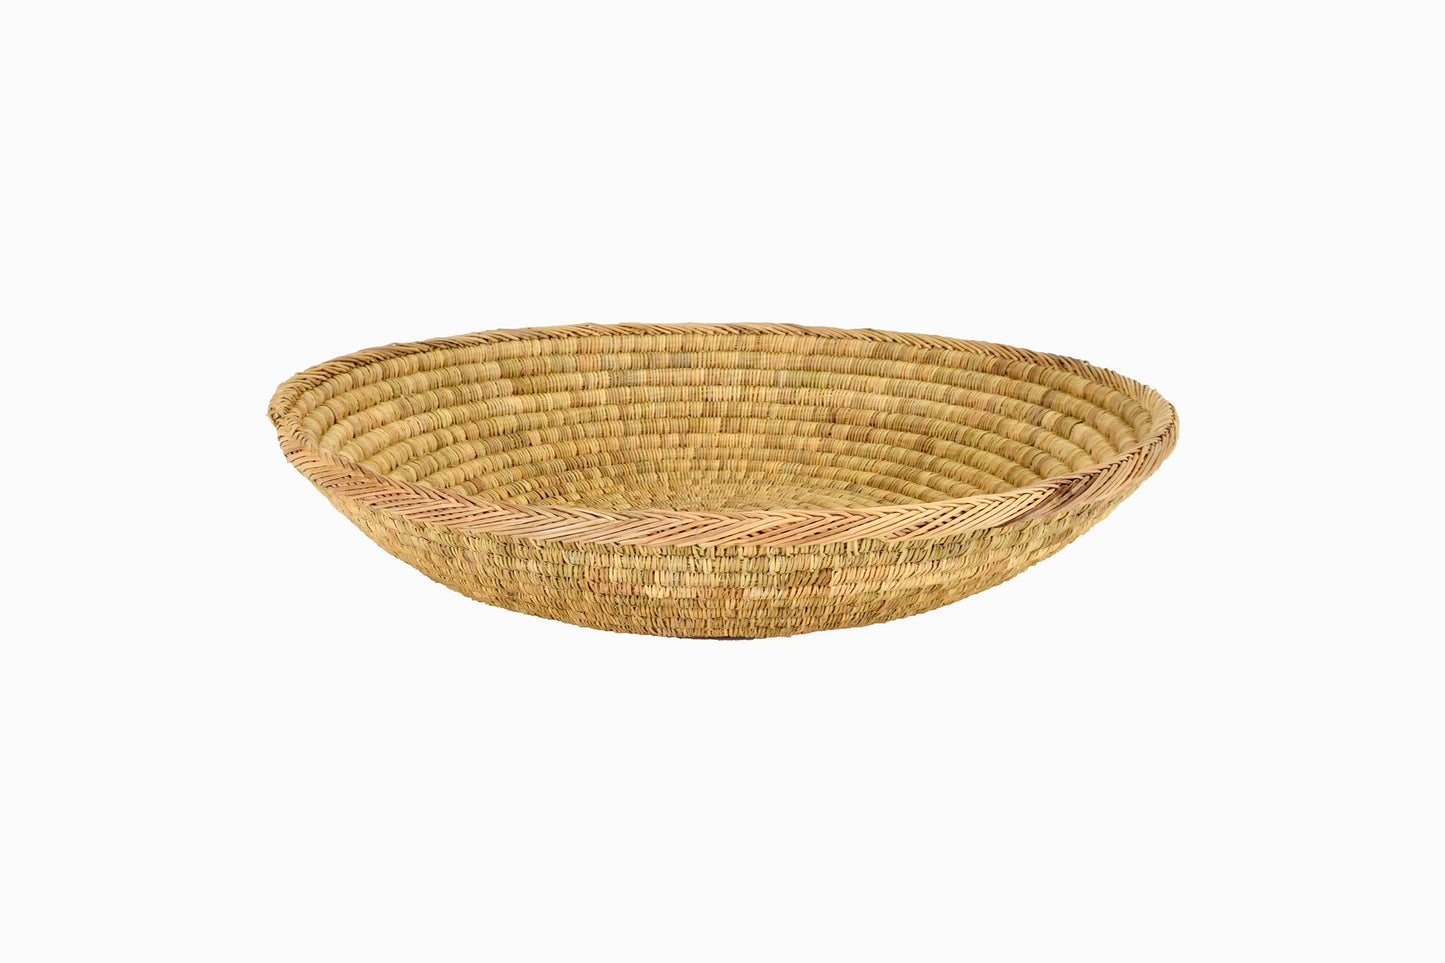 Finely woven Moroccan straw basket